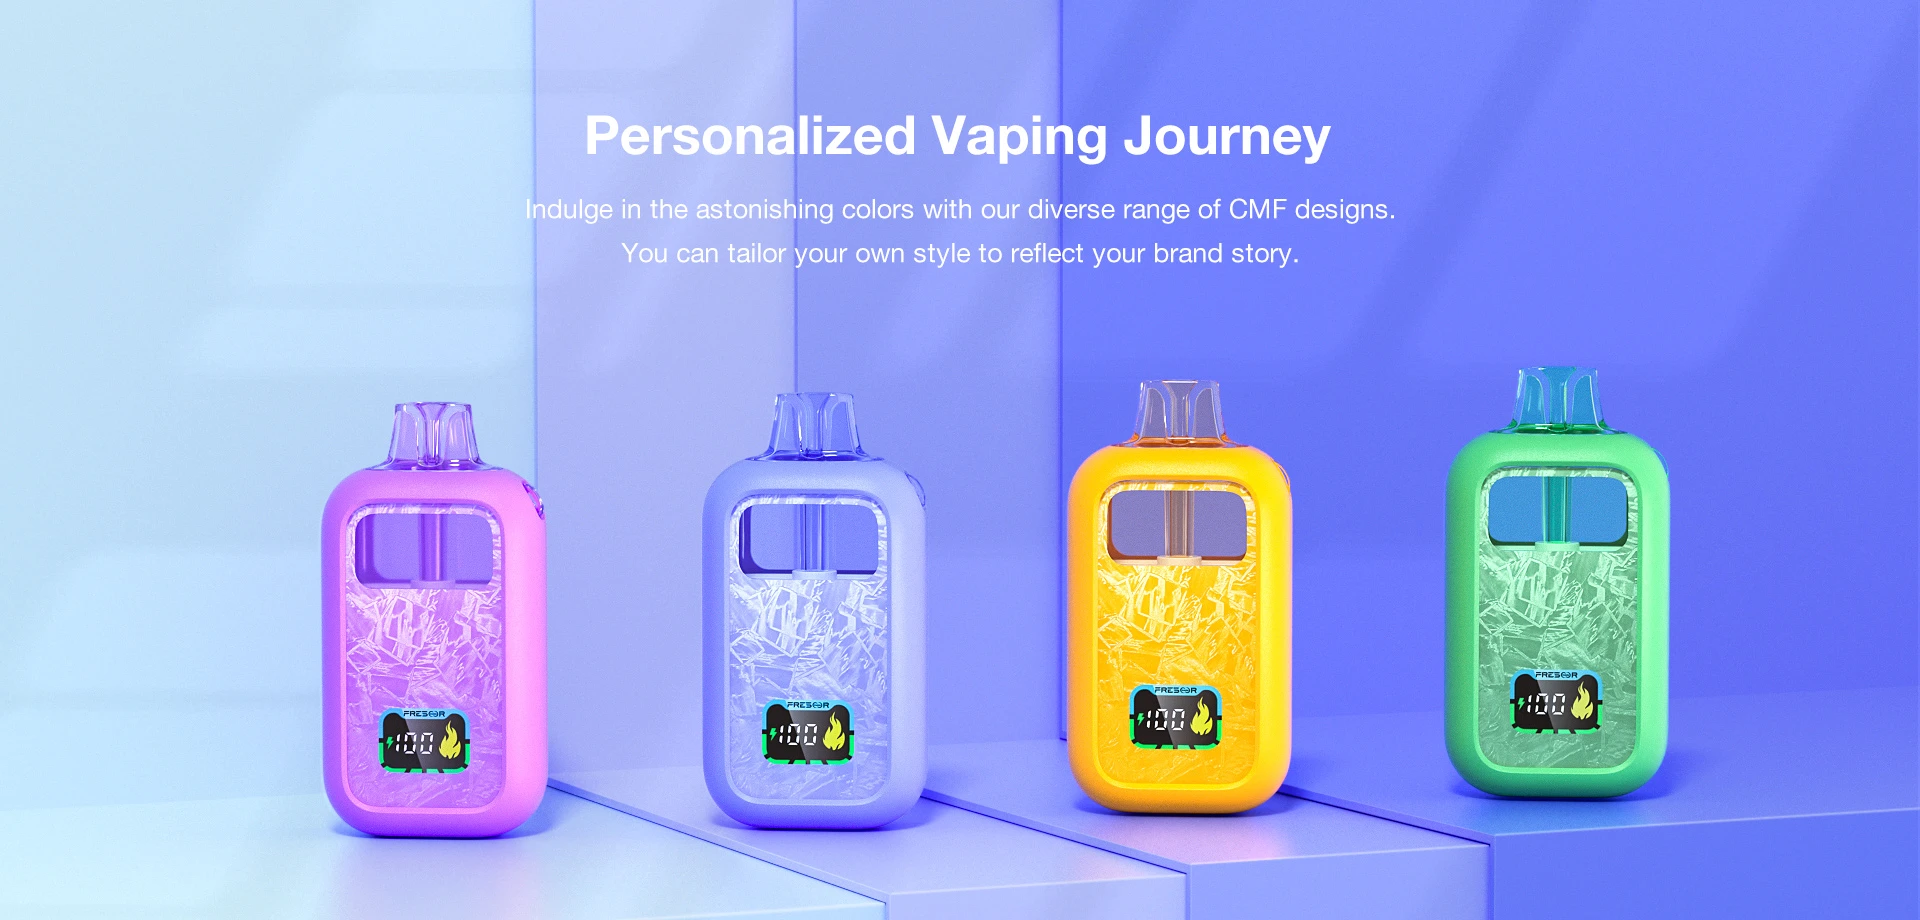 Personalized Vaping Journey Indulge in the astonishing colors with our diverse range of CMF designs. You can tailor your own style to reflect your brand story.